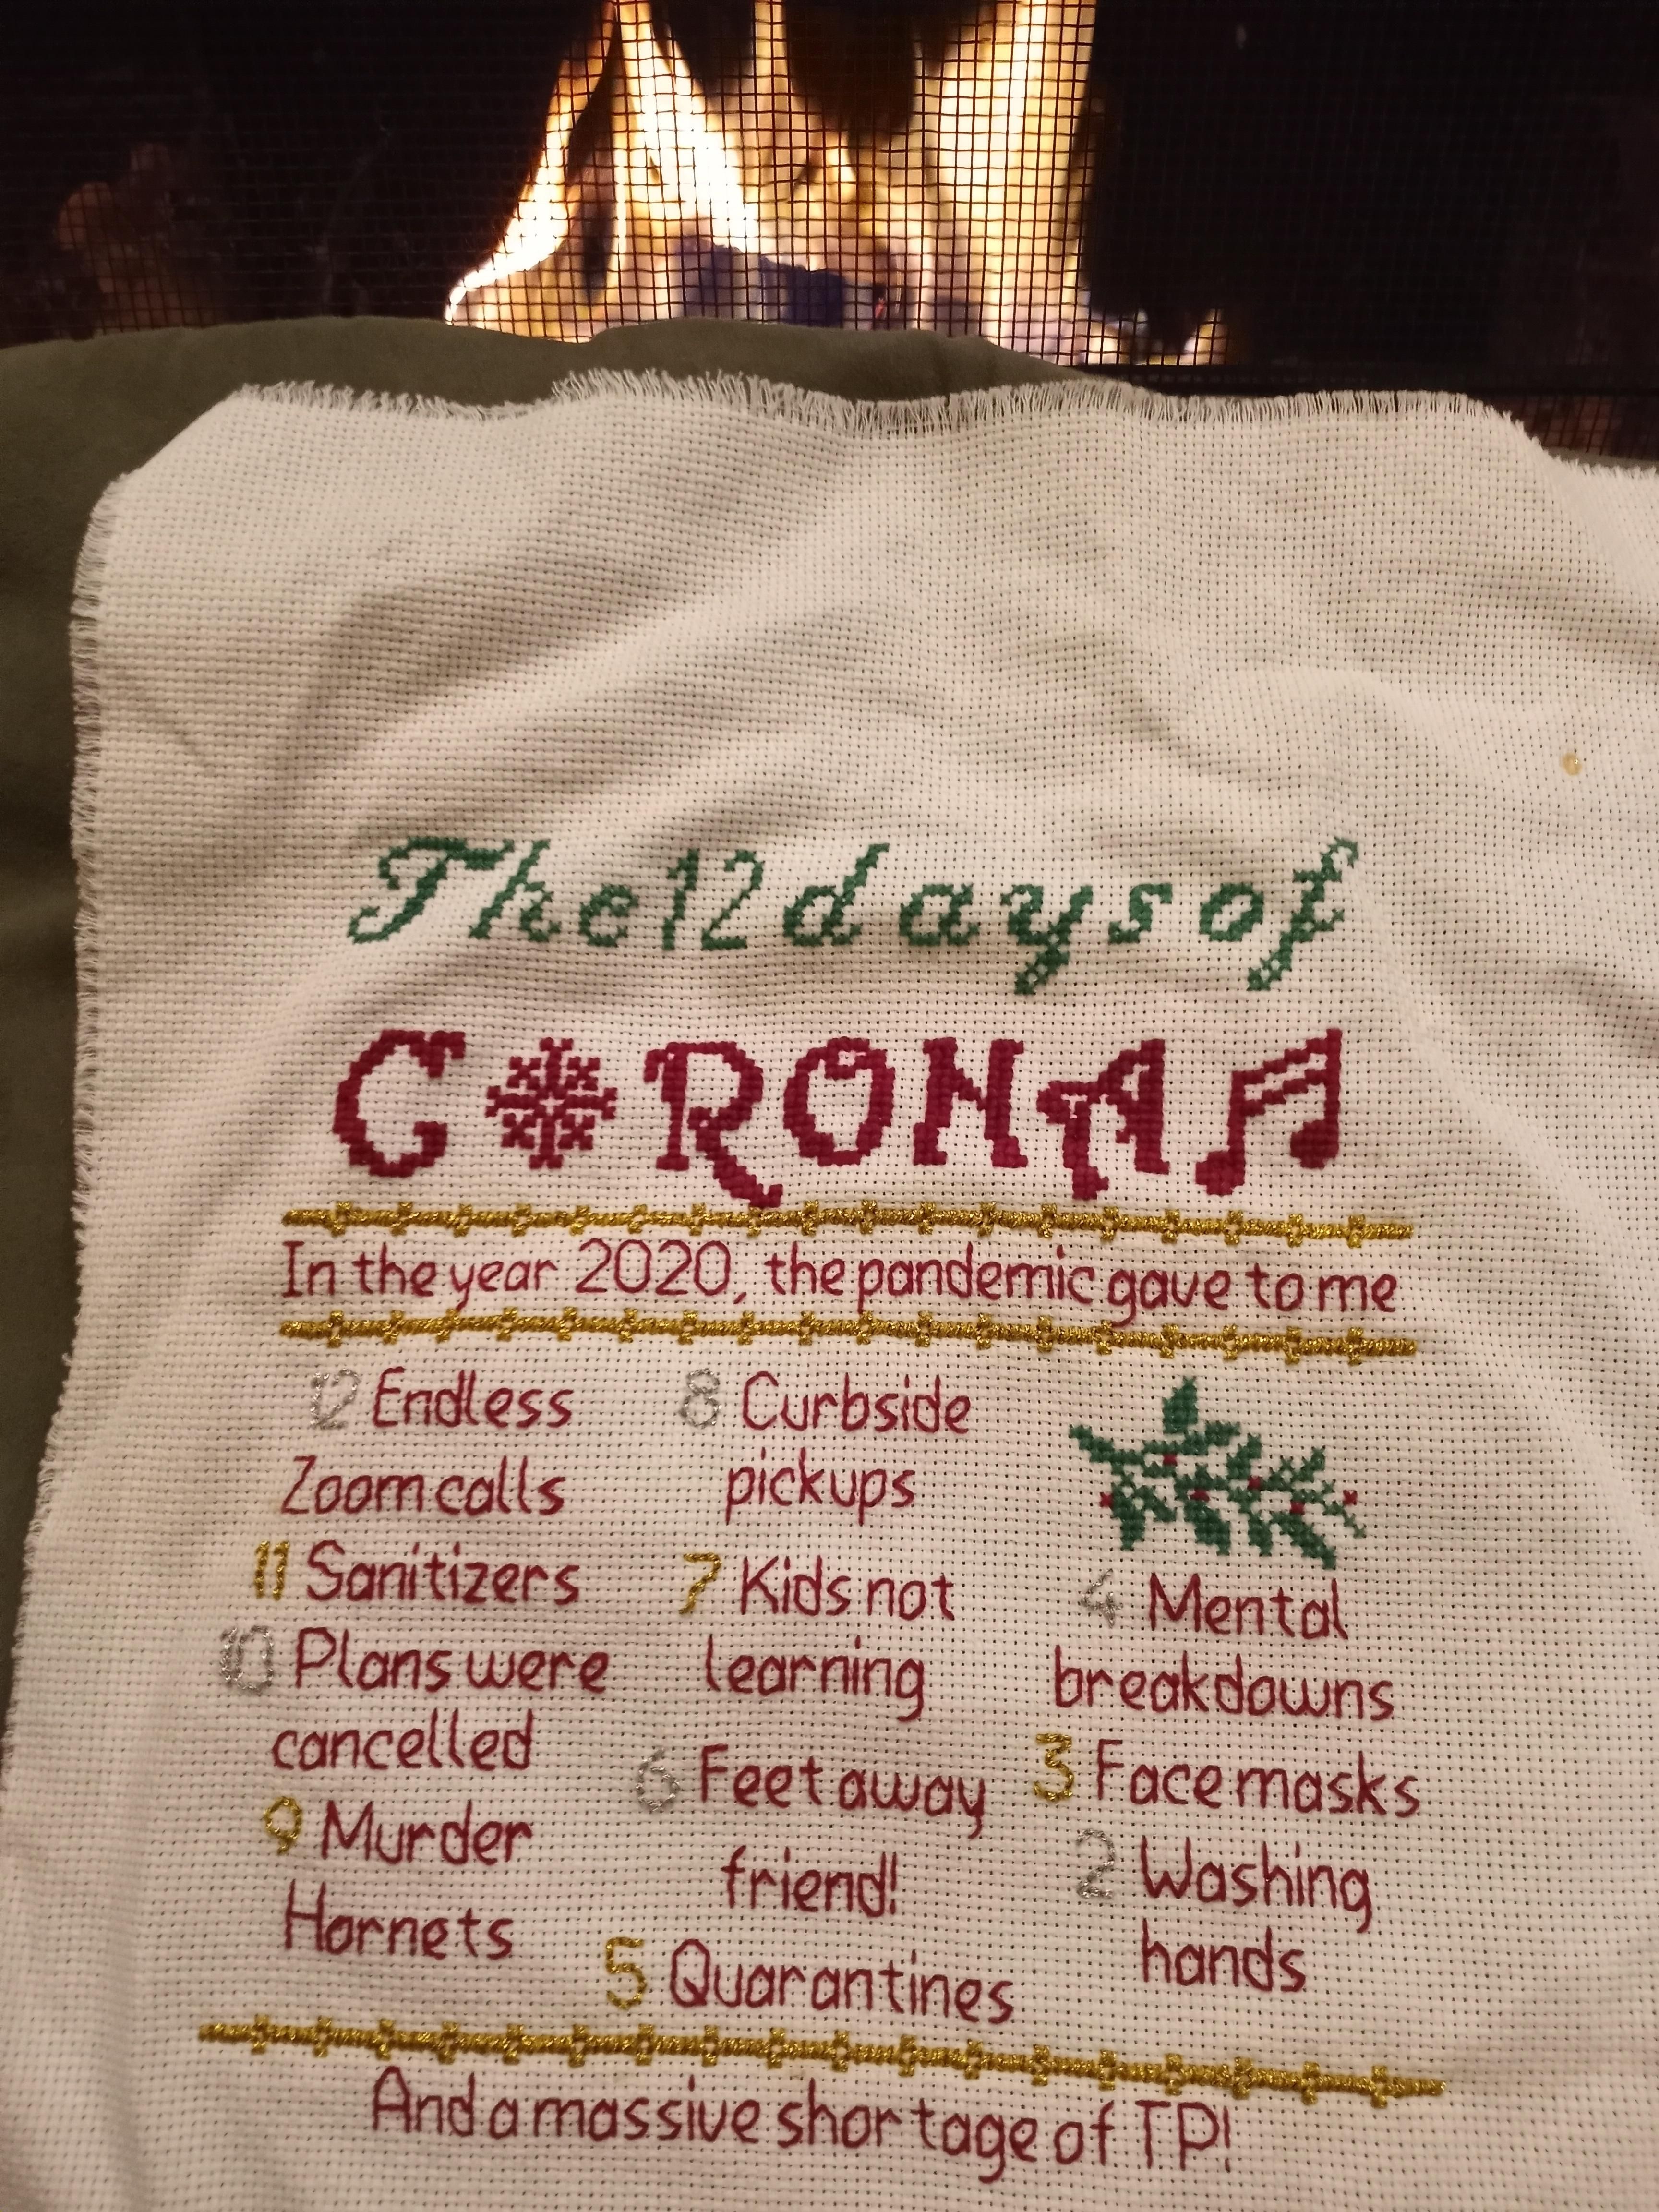 Obviously late, but hey, #2020. My self-drafted cross stitch pattern.